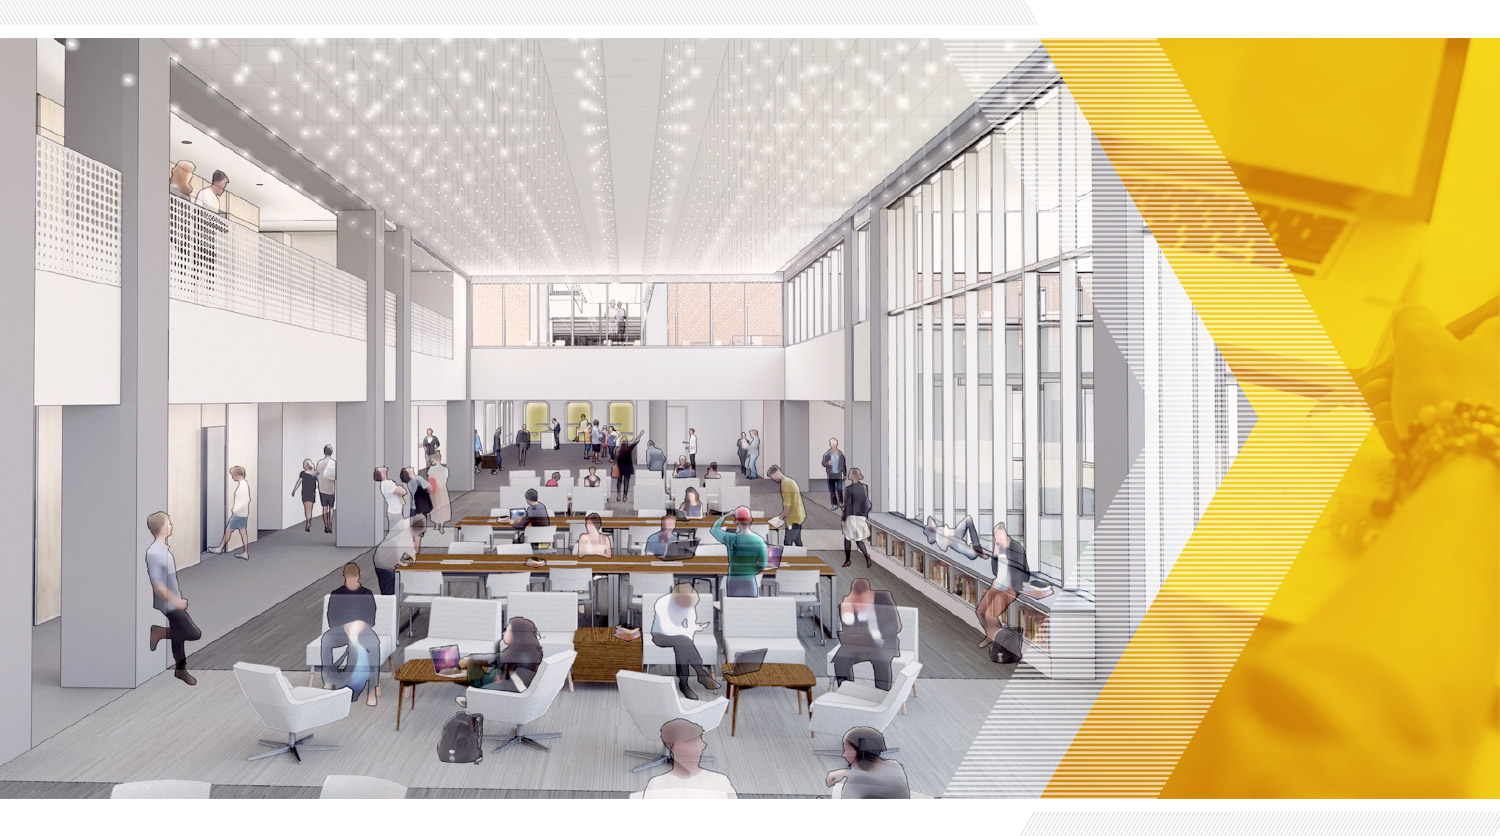 A rendering of the new library, featuring bright sunlight and a large open space for collaborating